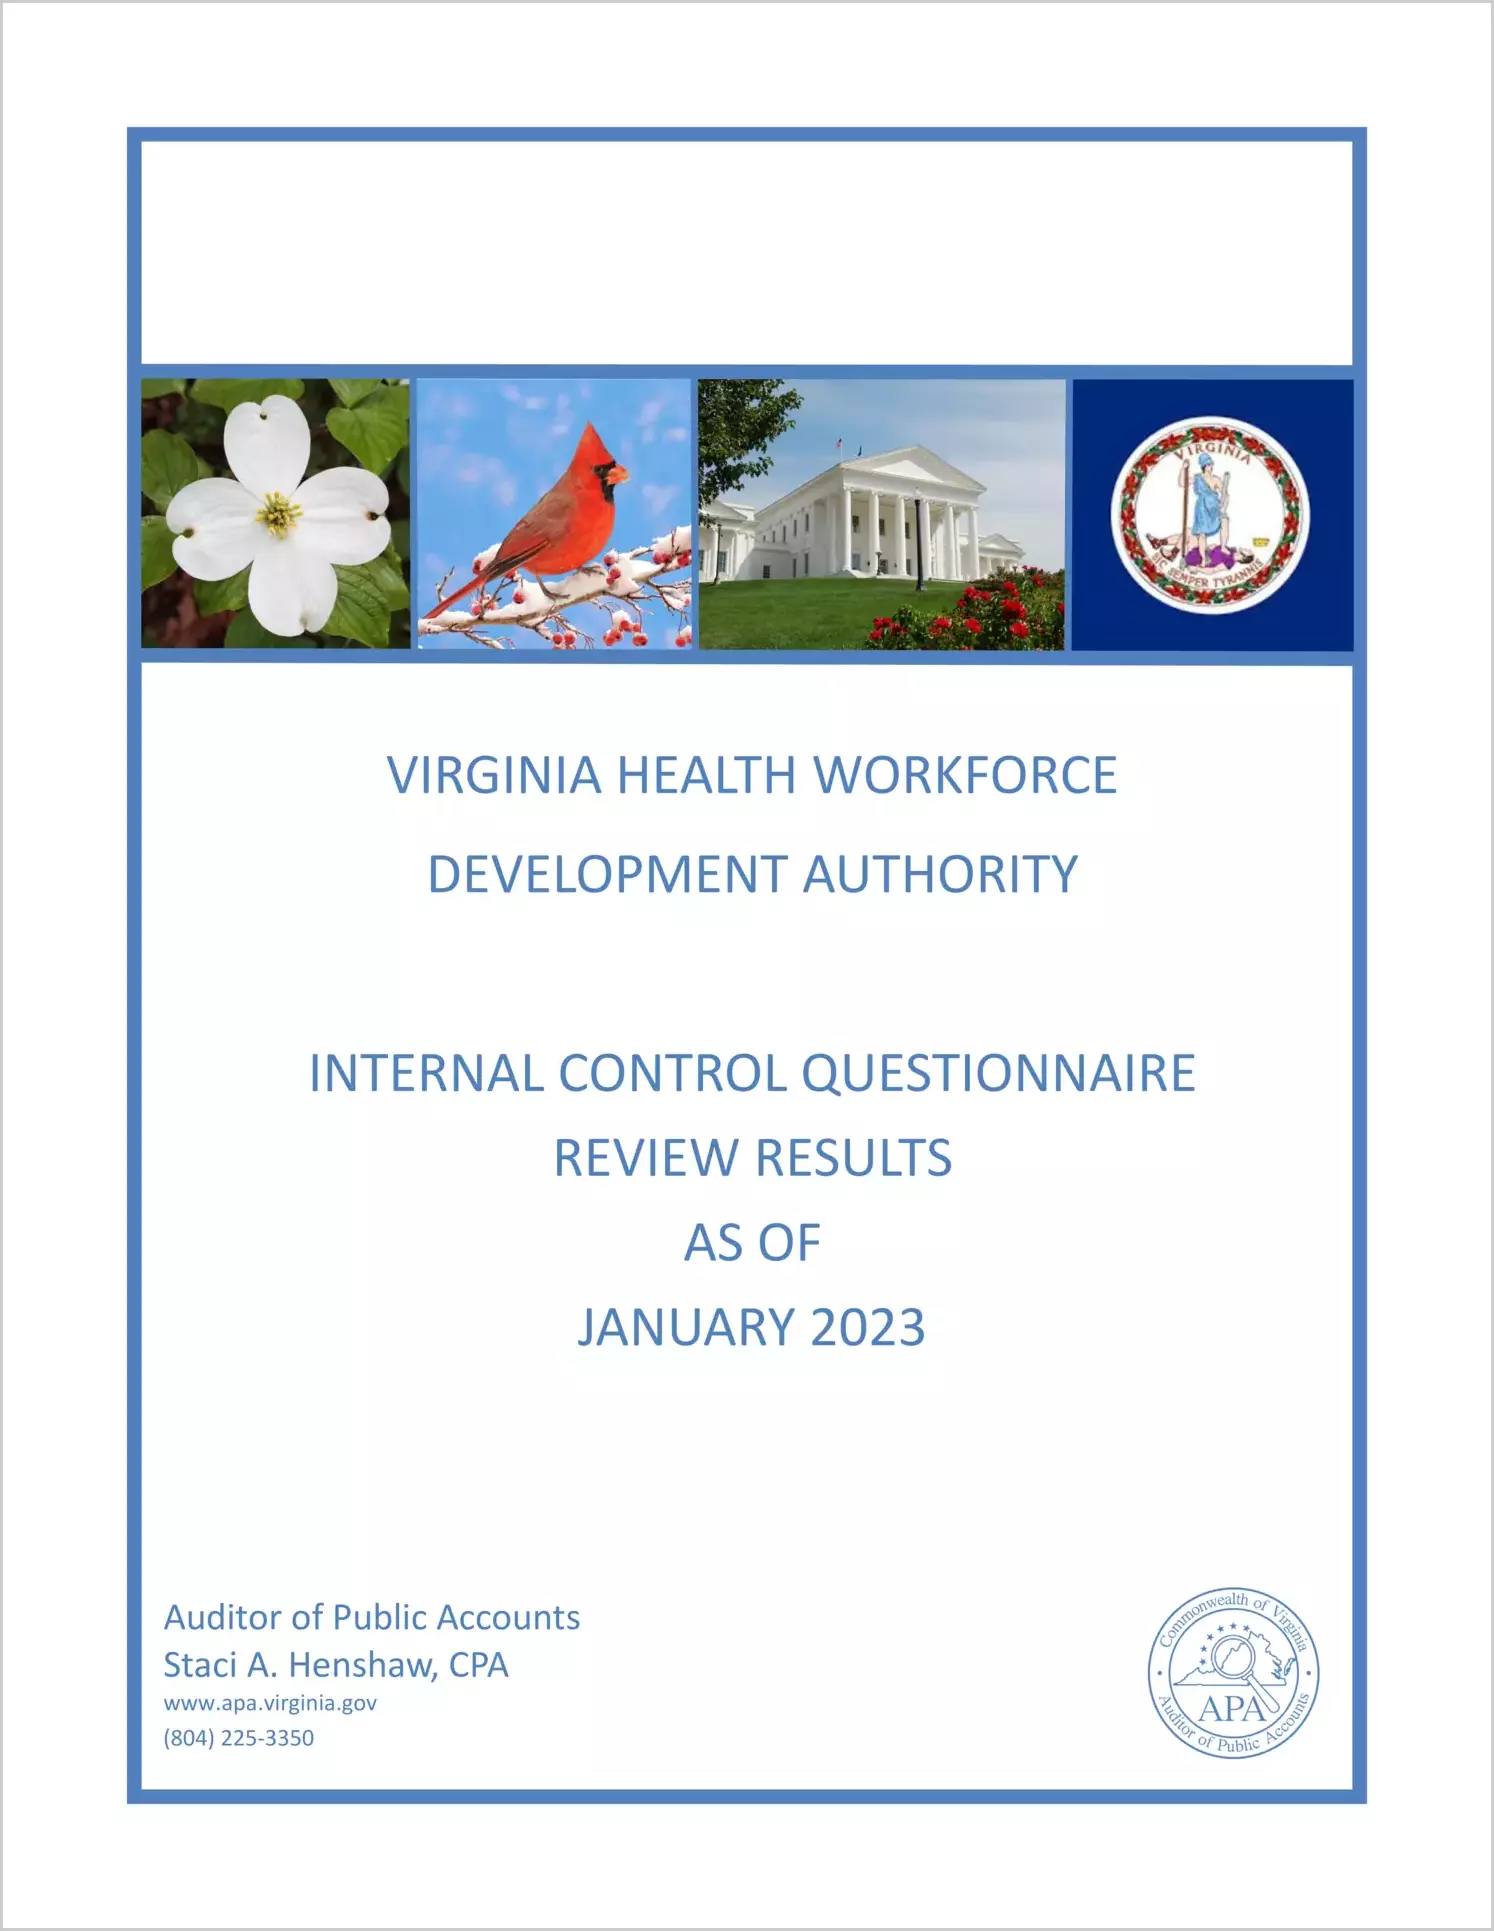 Virginia Health Workforce Development Authority Internal Control Questionnaire Review Results as of January 2023